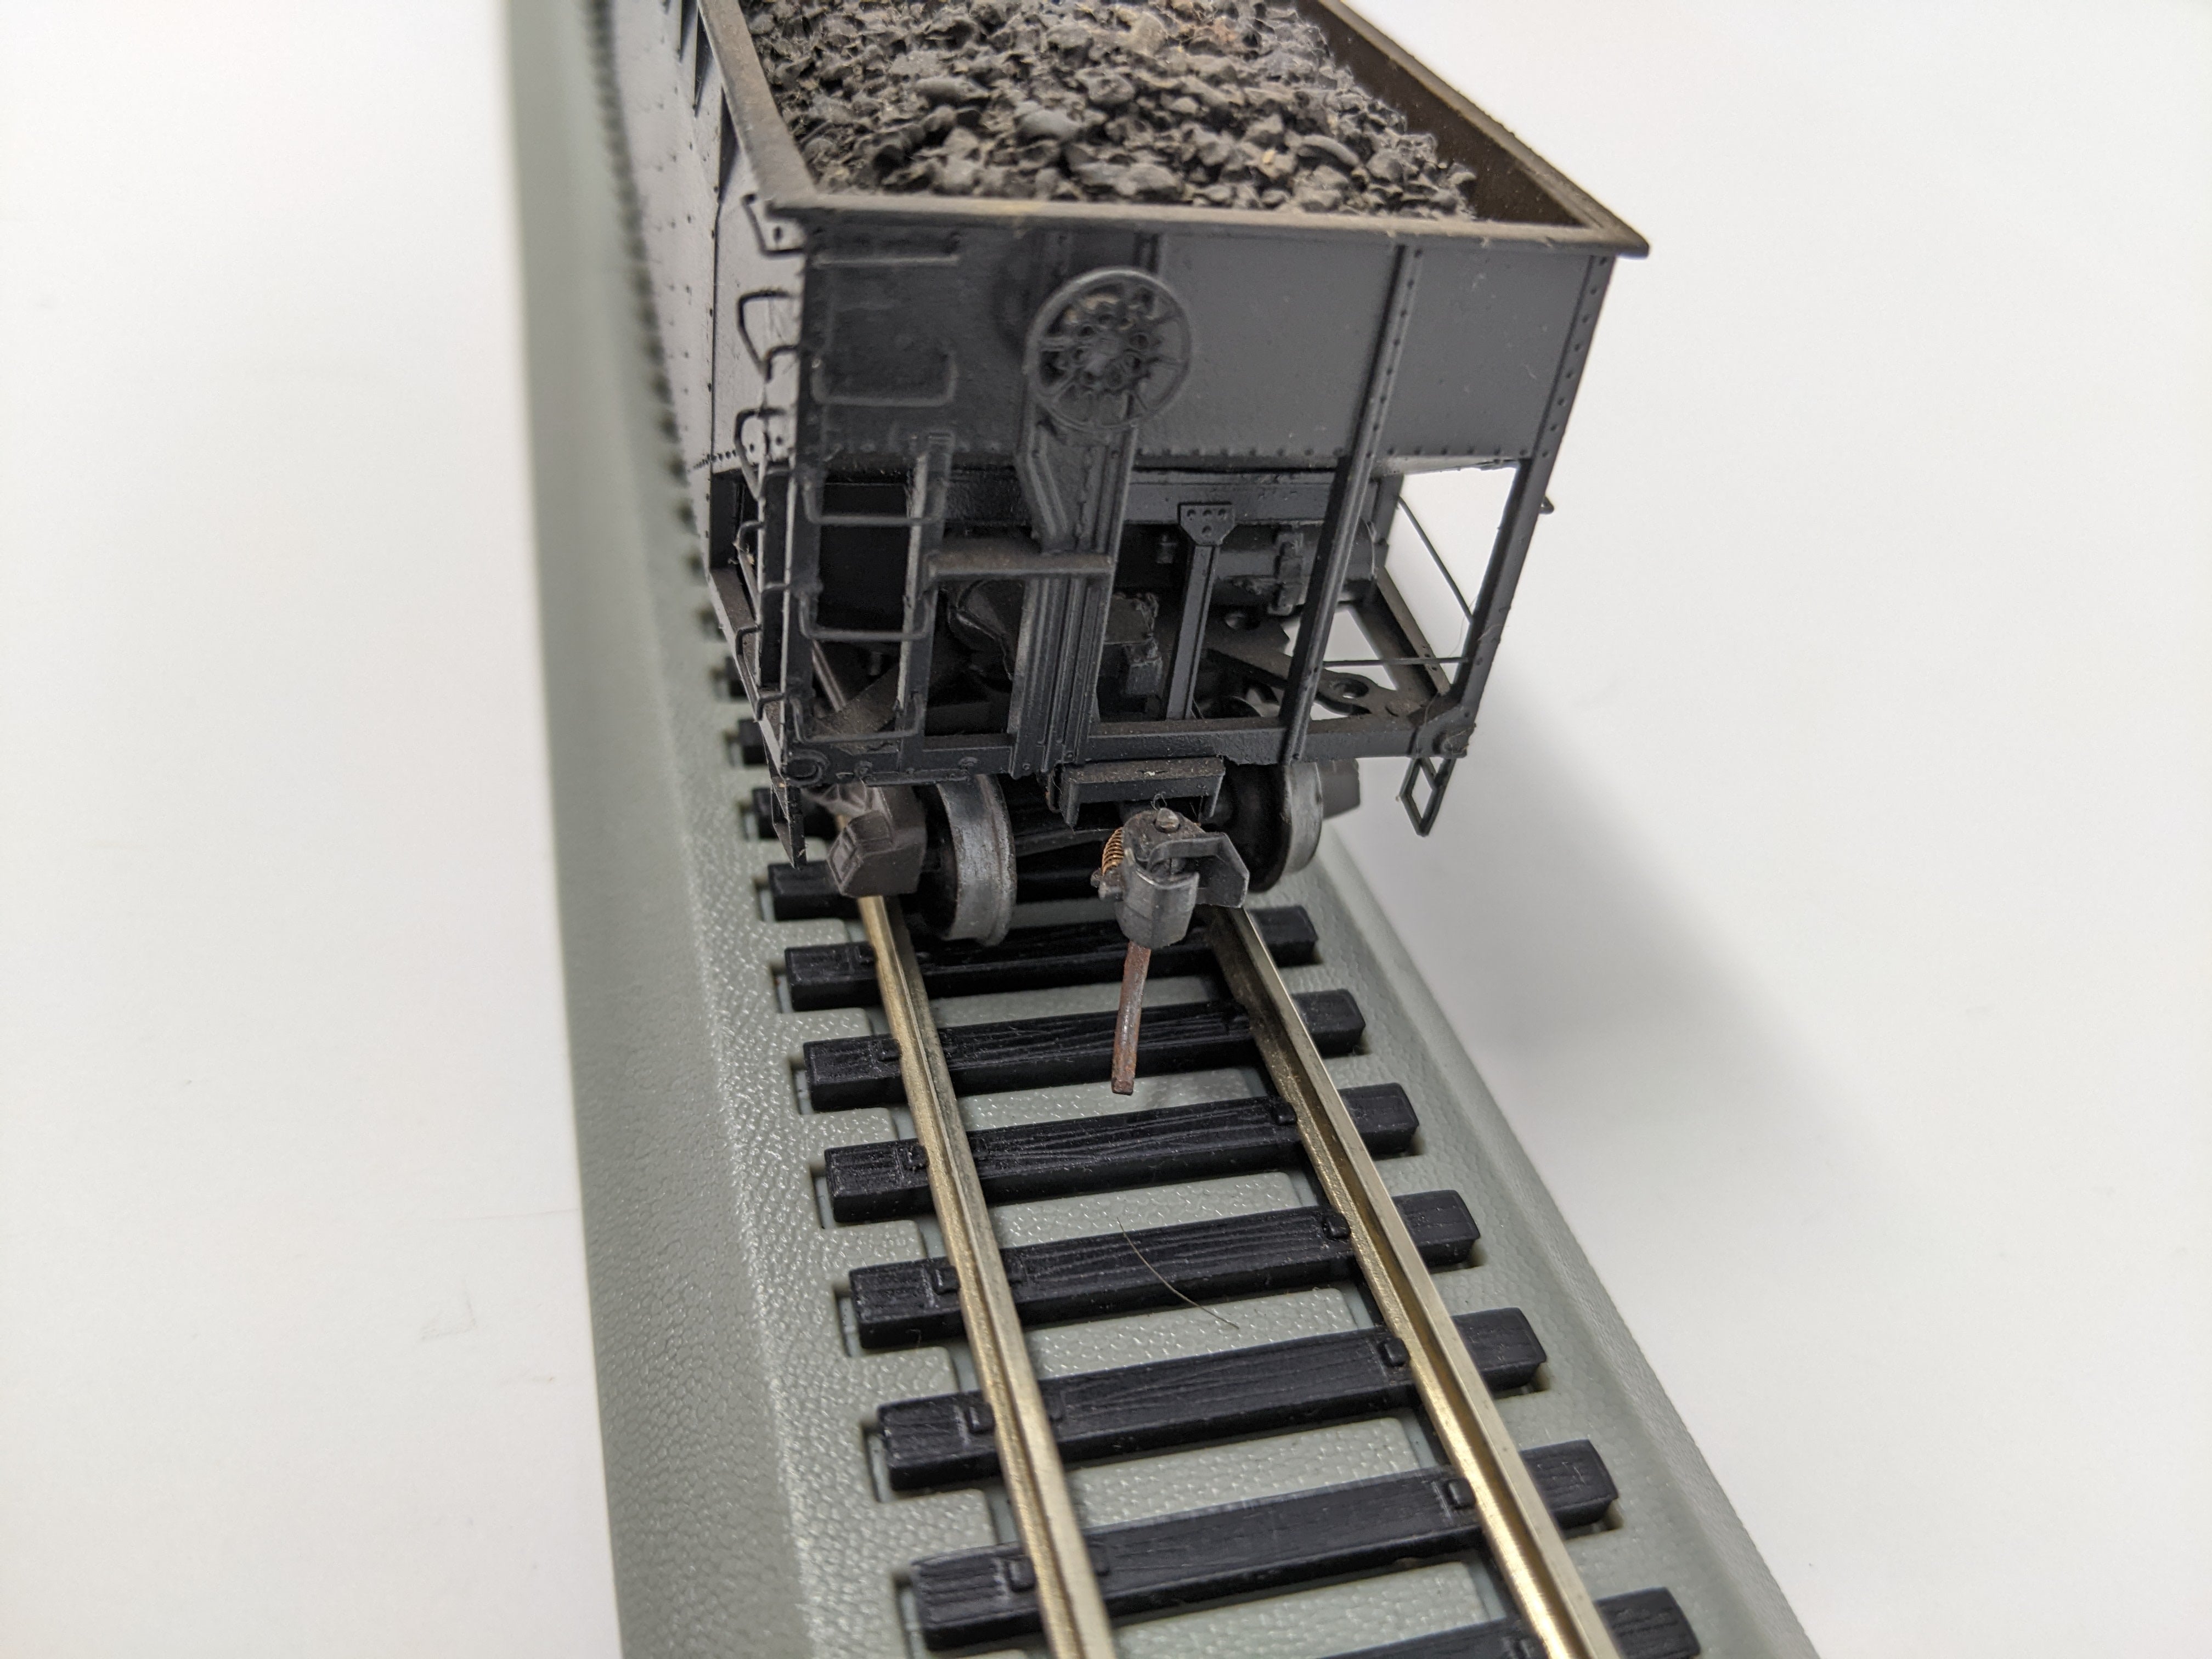 USED Athearn HO Scale, 2 Bay Open Hopper, Undecorated Black , Read Description